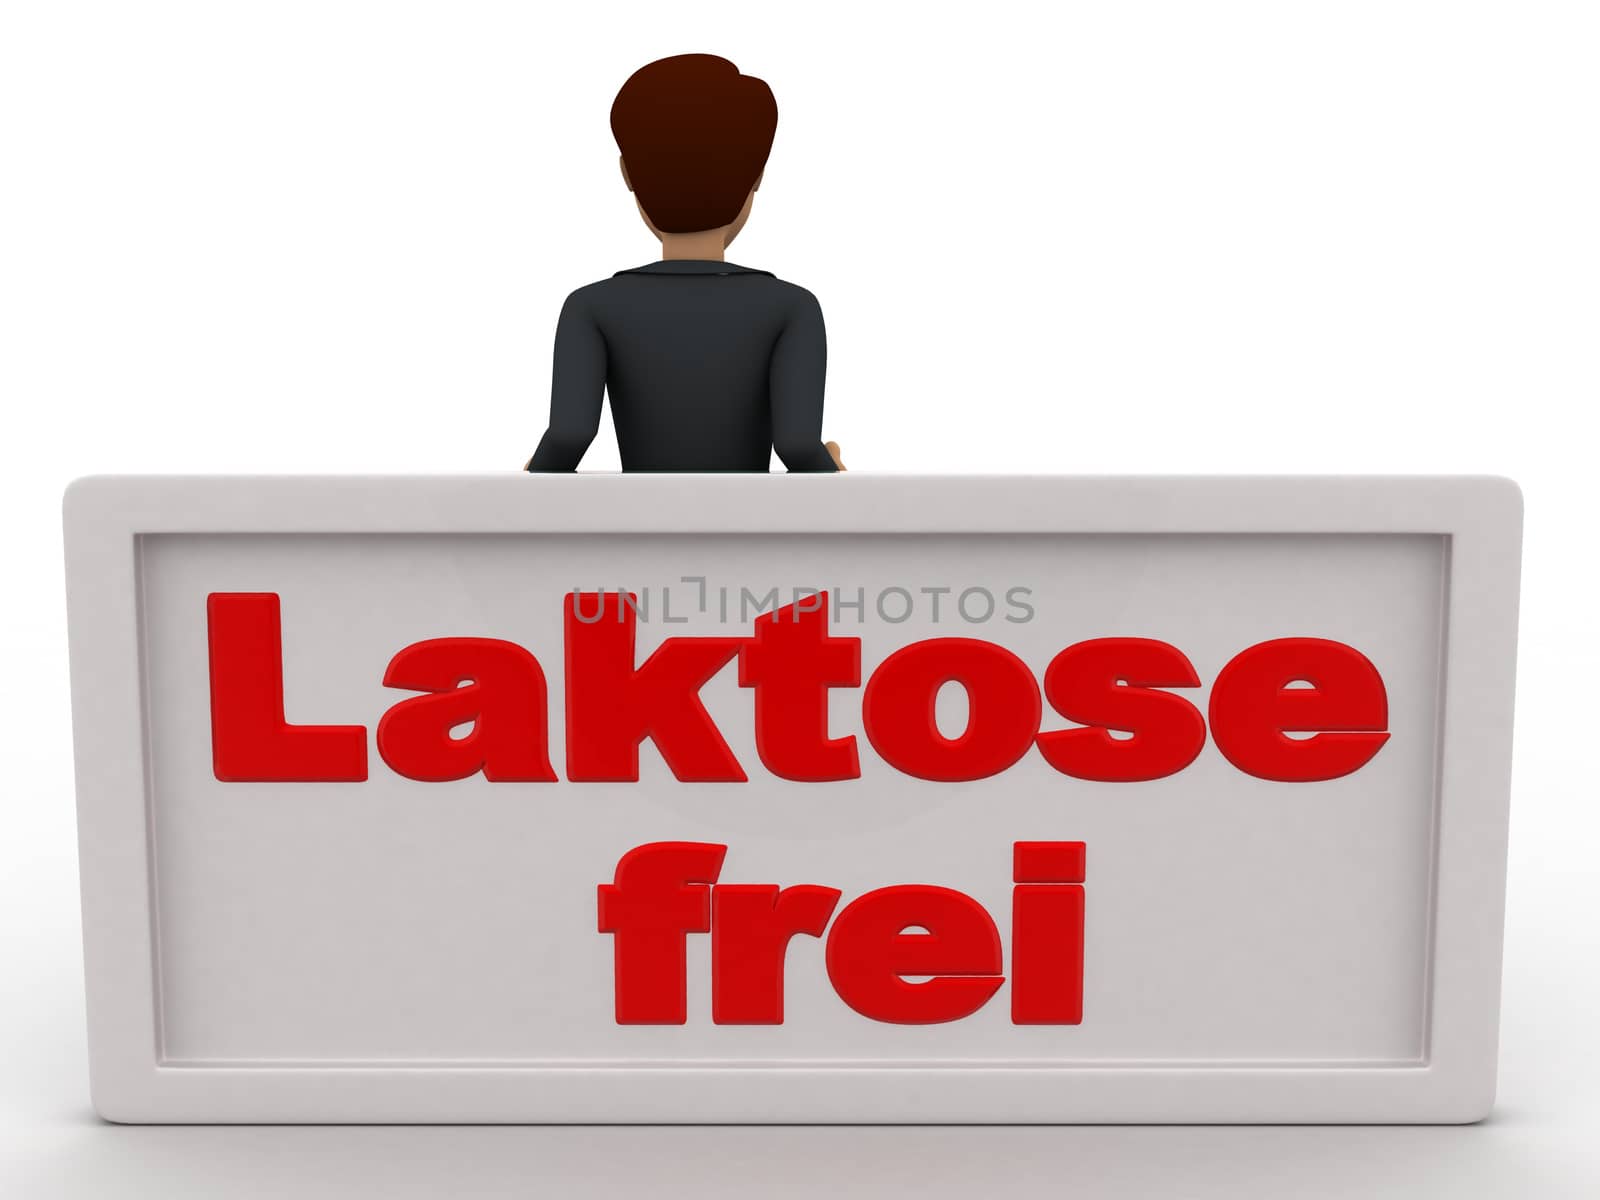 3d man leaning on lakstose frel board concept by touchmenithin@gmail.com